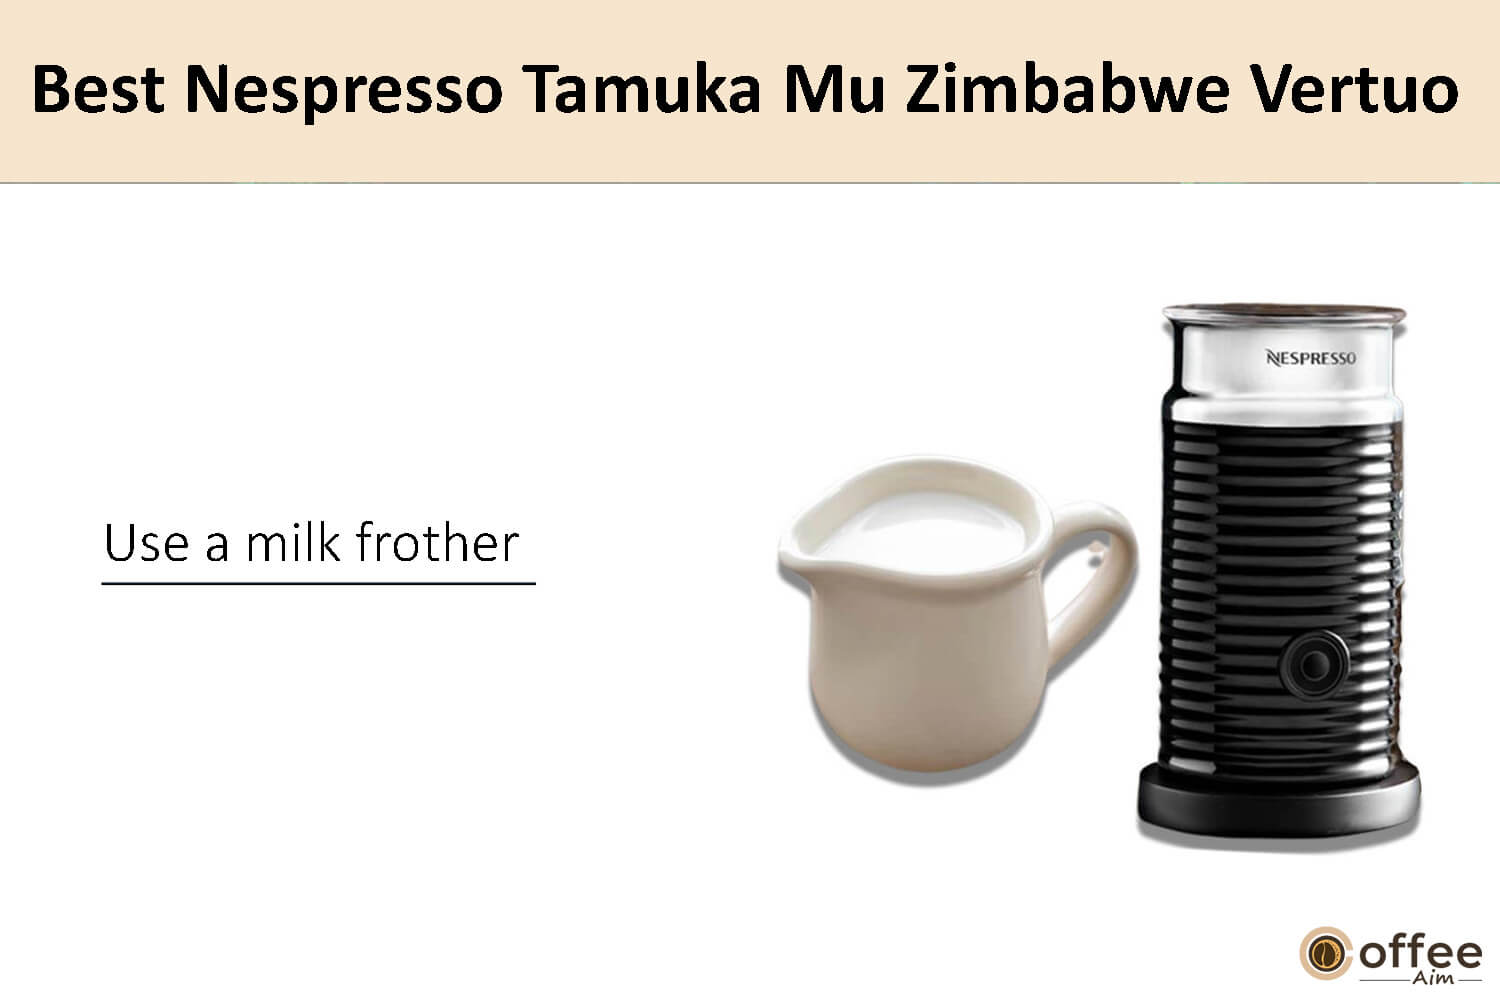 In this image, I elucidate the preparation instructions for crafting the finest Nespresso  Tamuka MU Zimbabwe Vertuo coffee pod.